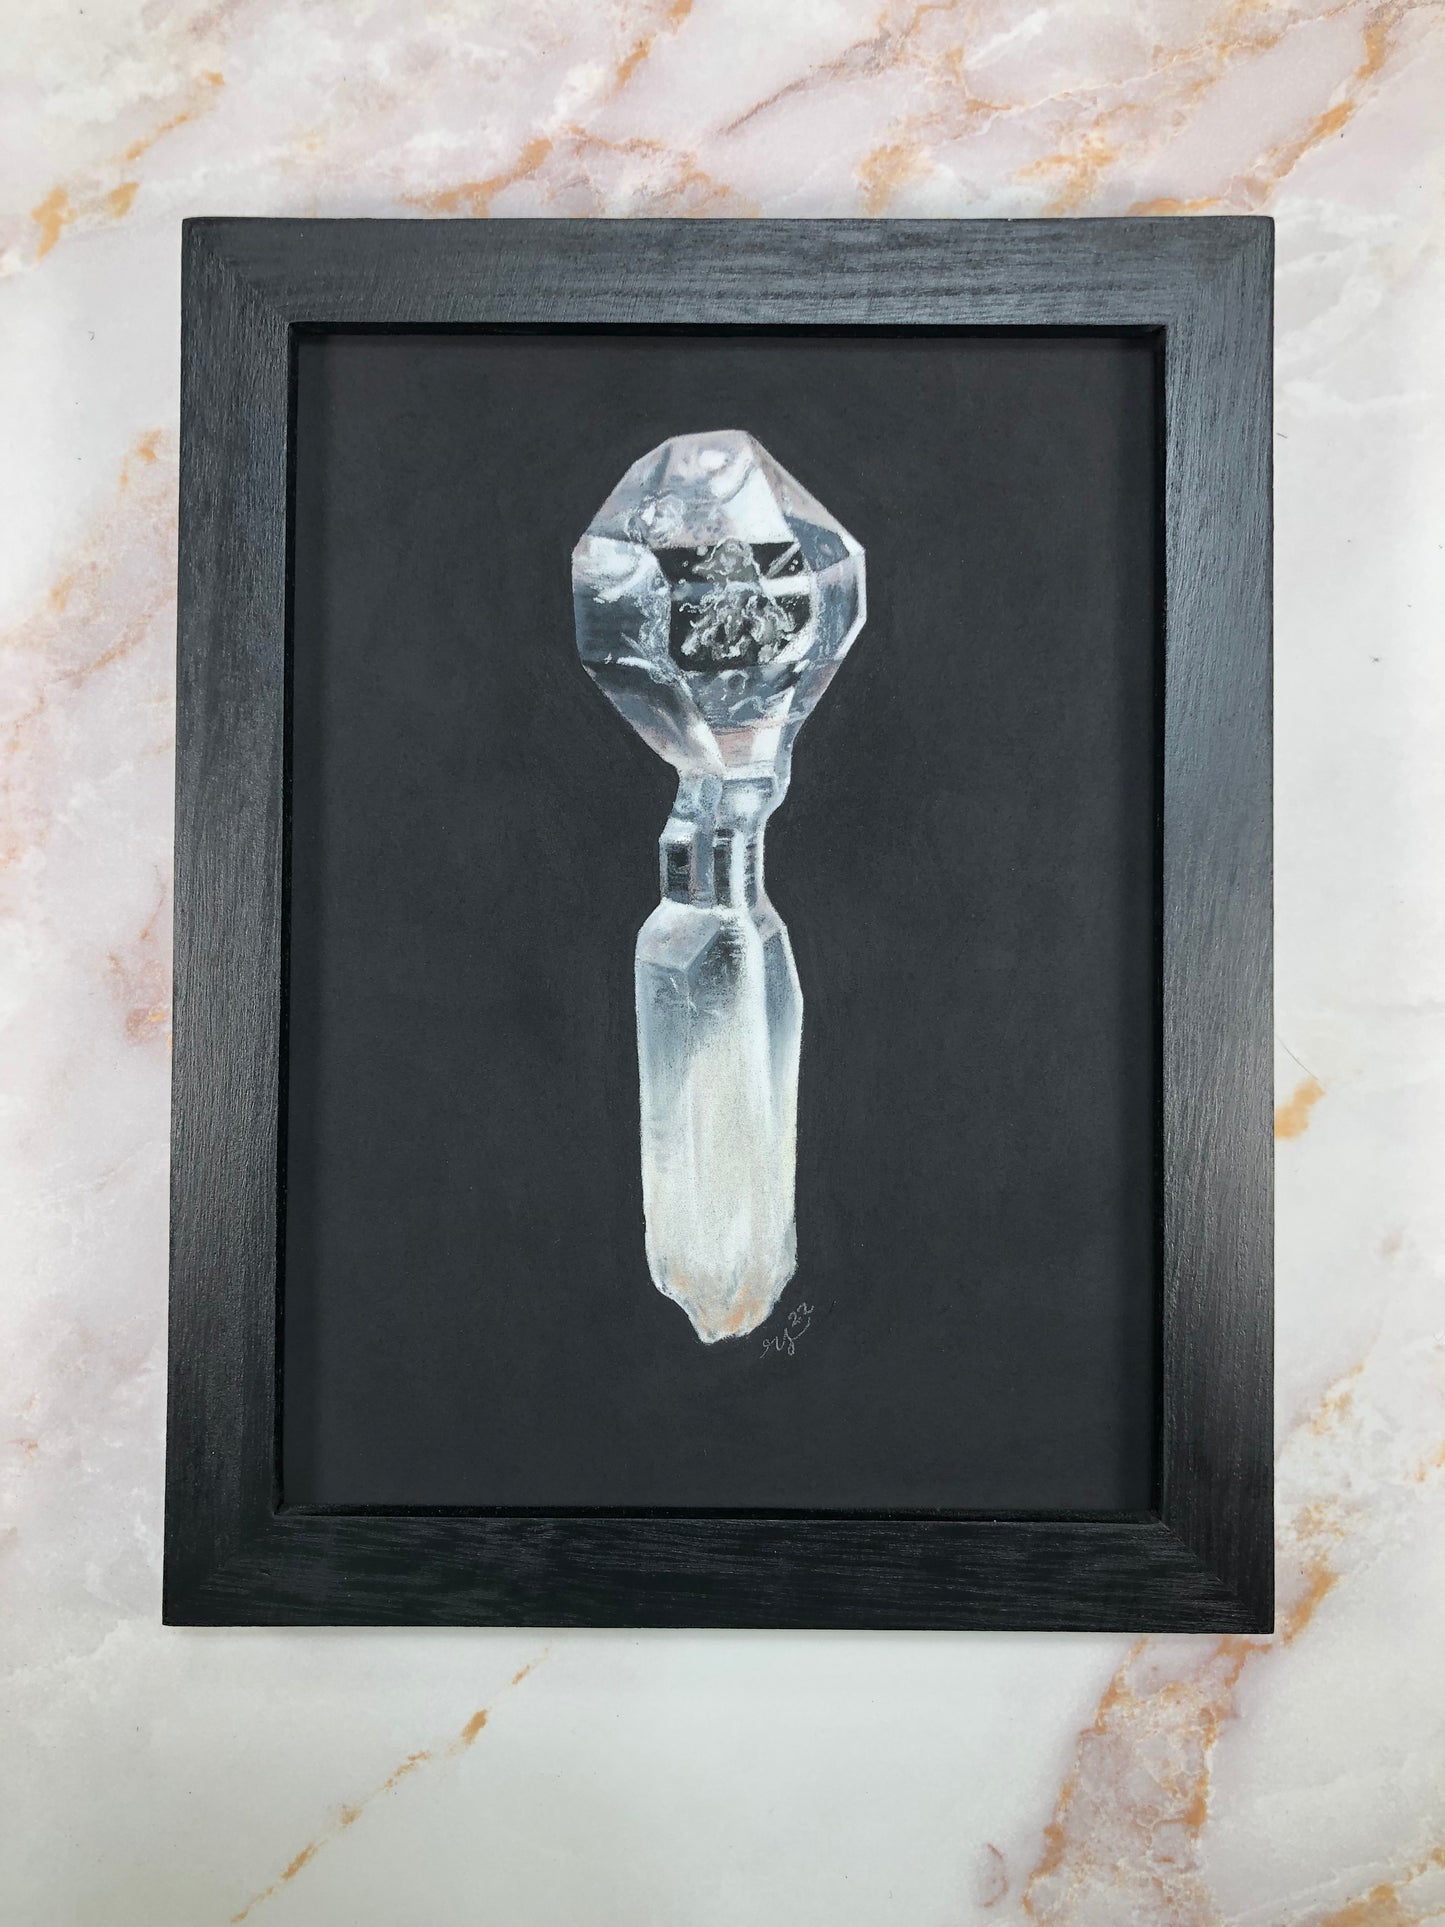 Glassy Mexican Scepter with Pastel Pencil Portrait Set!